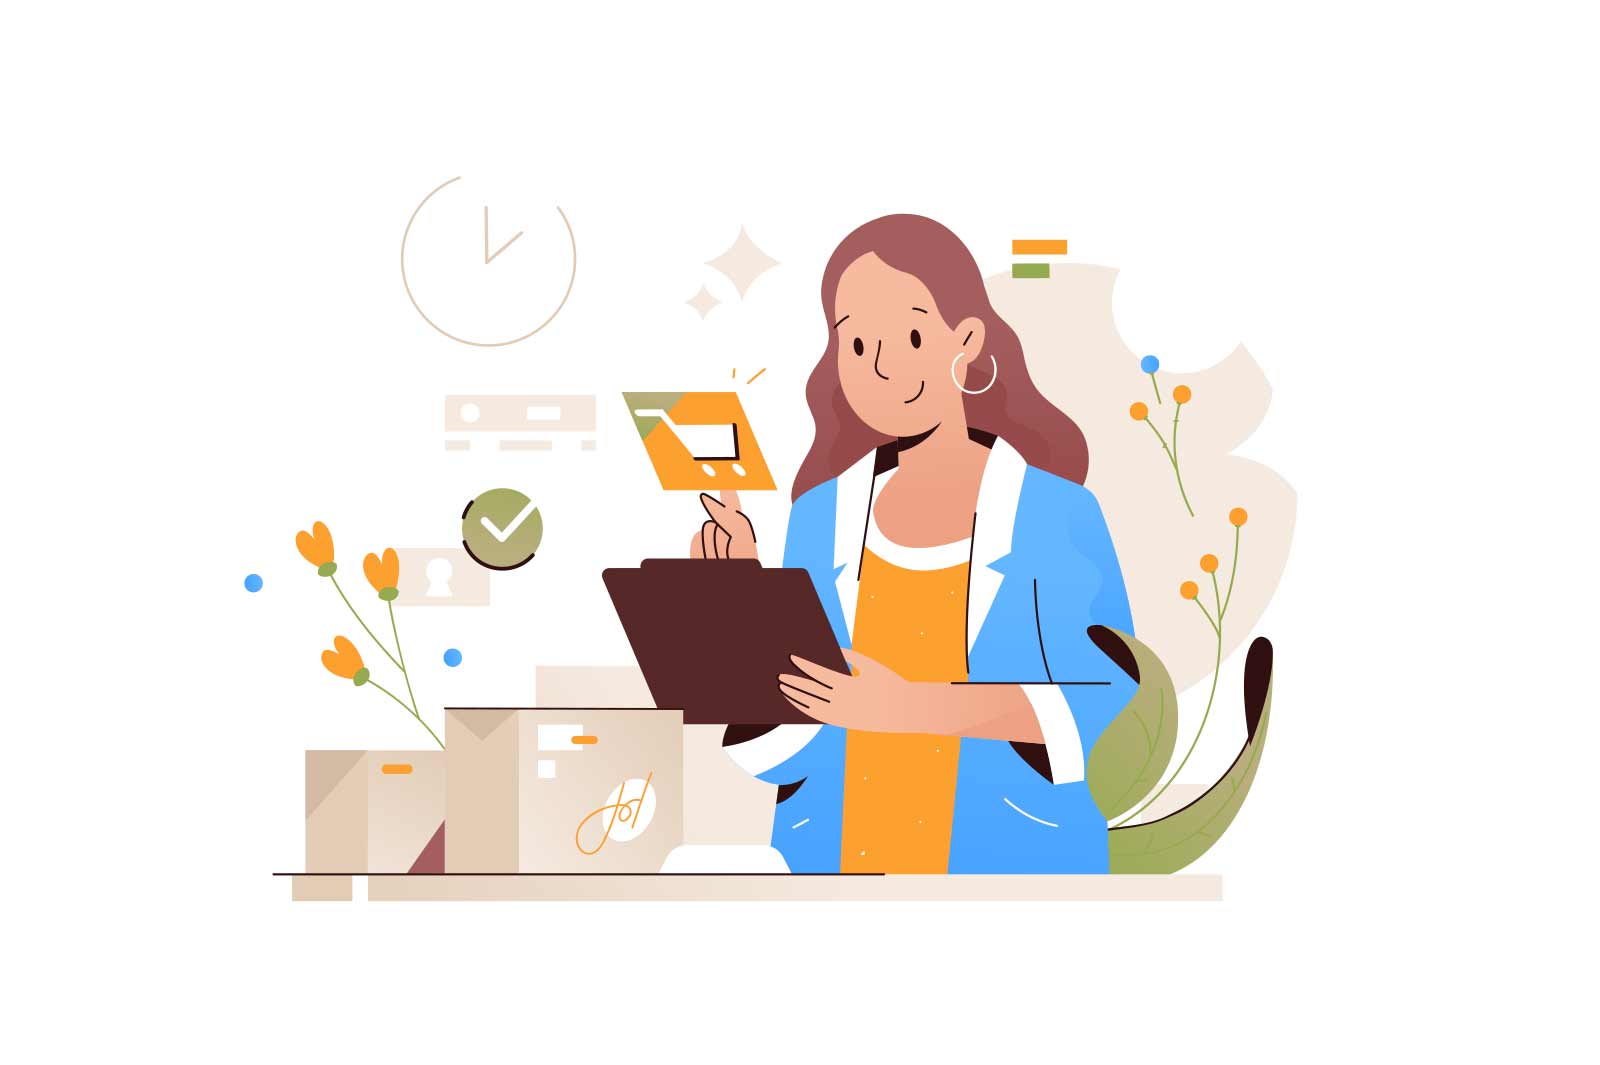 Smiling woman shopping online using tablet vector illustration. Online purchasing goods and delivery concept